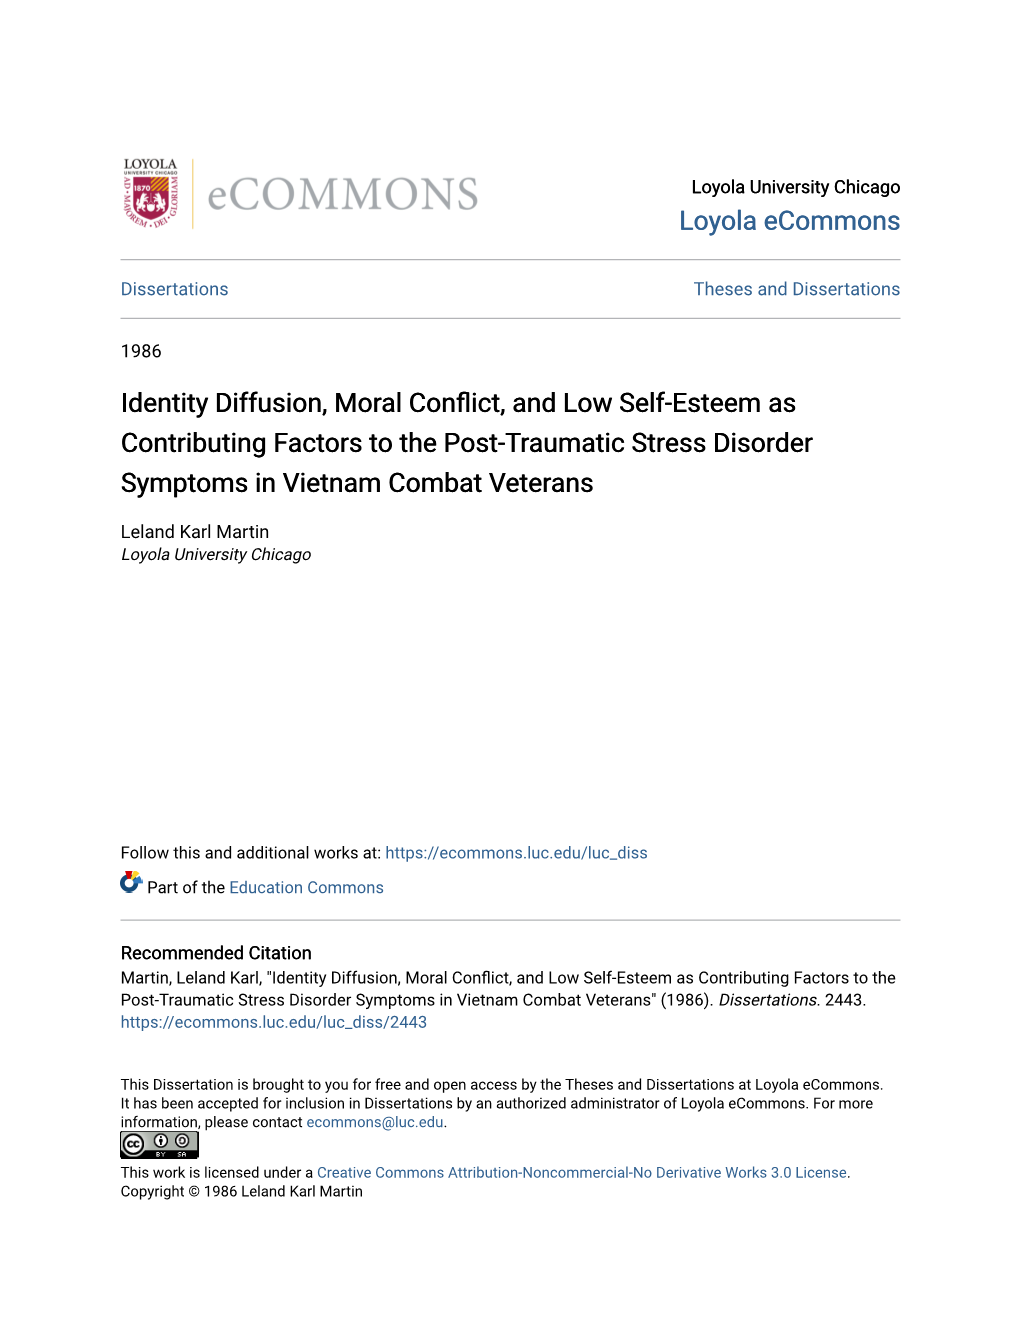 Identity Diffusion, Moral Conflict, and Low Self-Esteem As Contributing Factors to the Post-Traumatic Stress Disorder Symptoms in Vietnam Combat Veterans